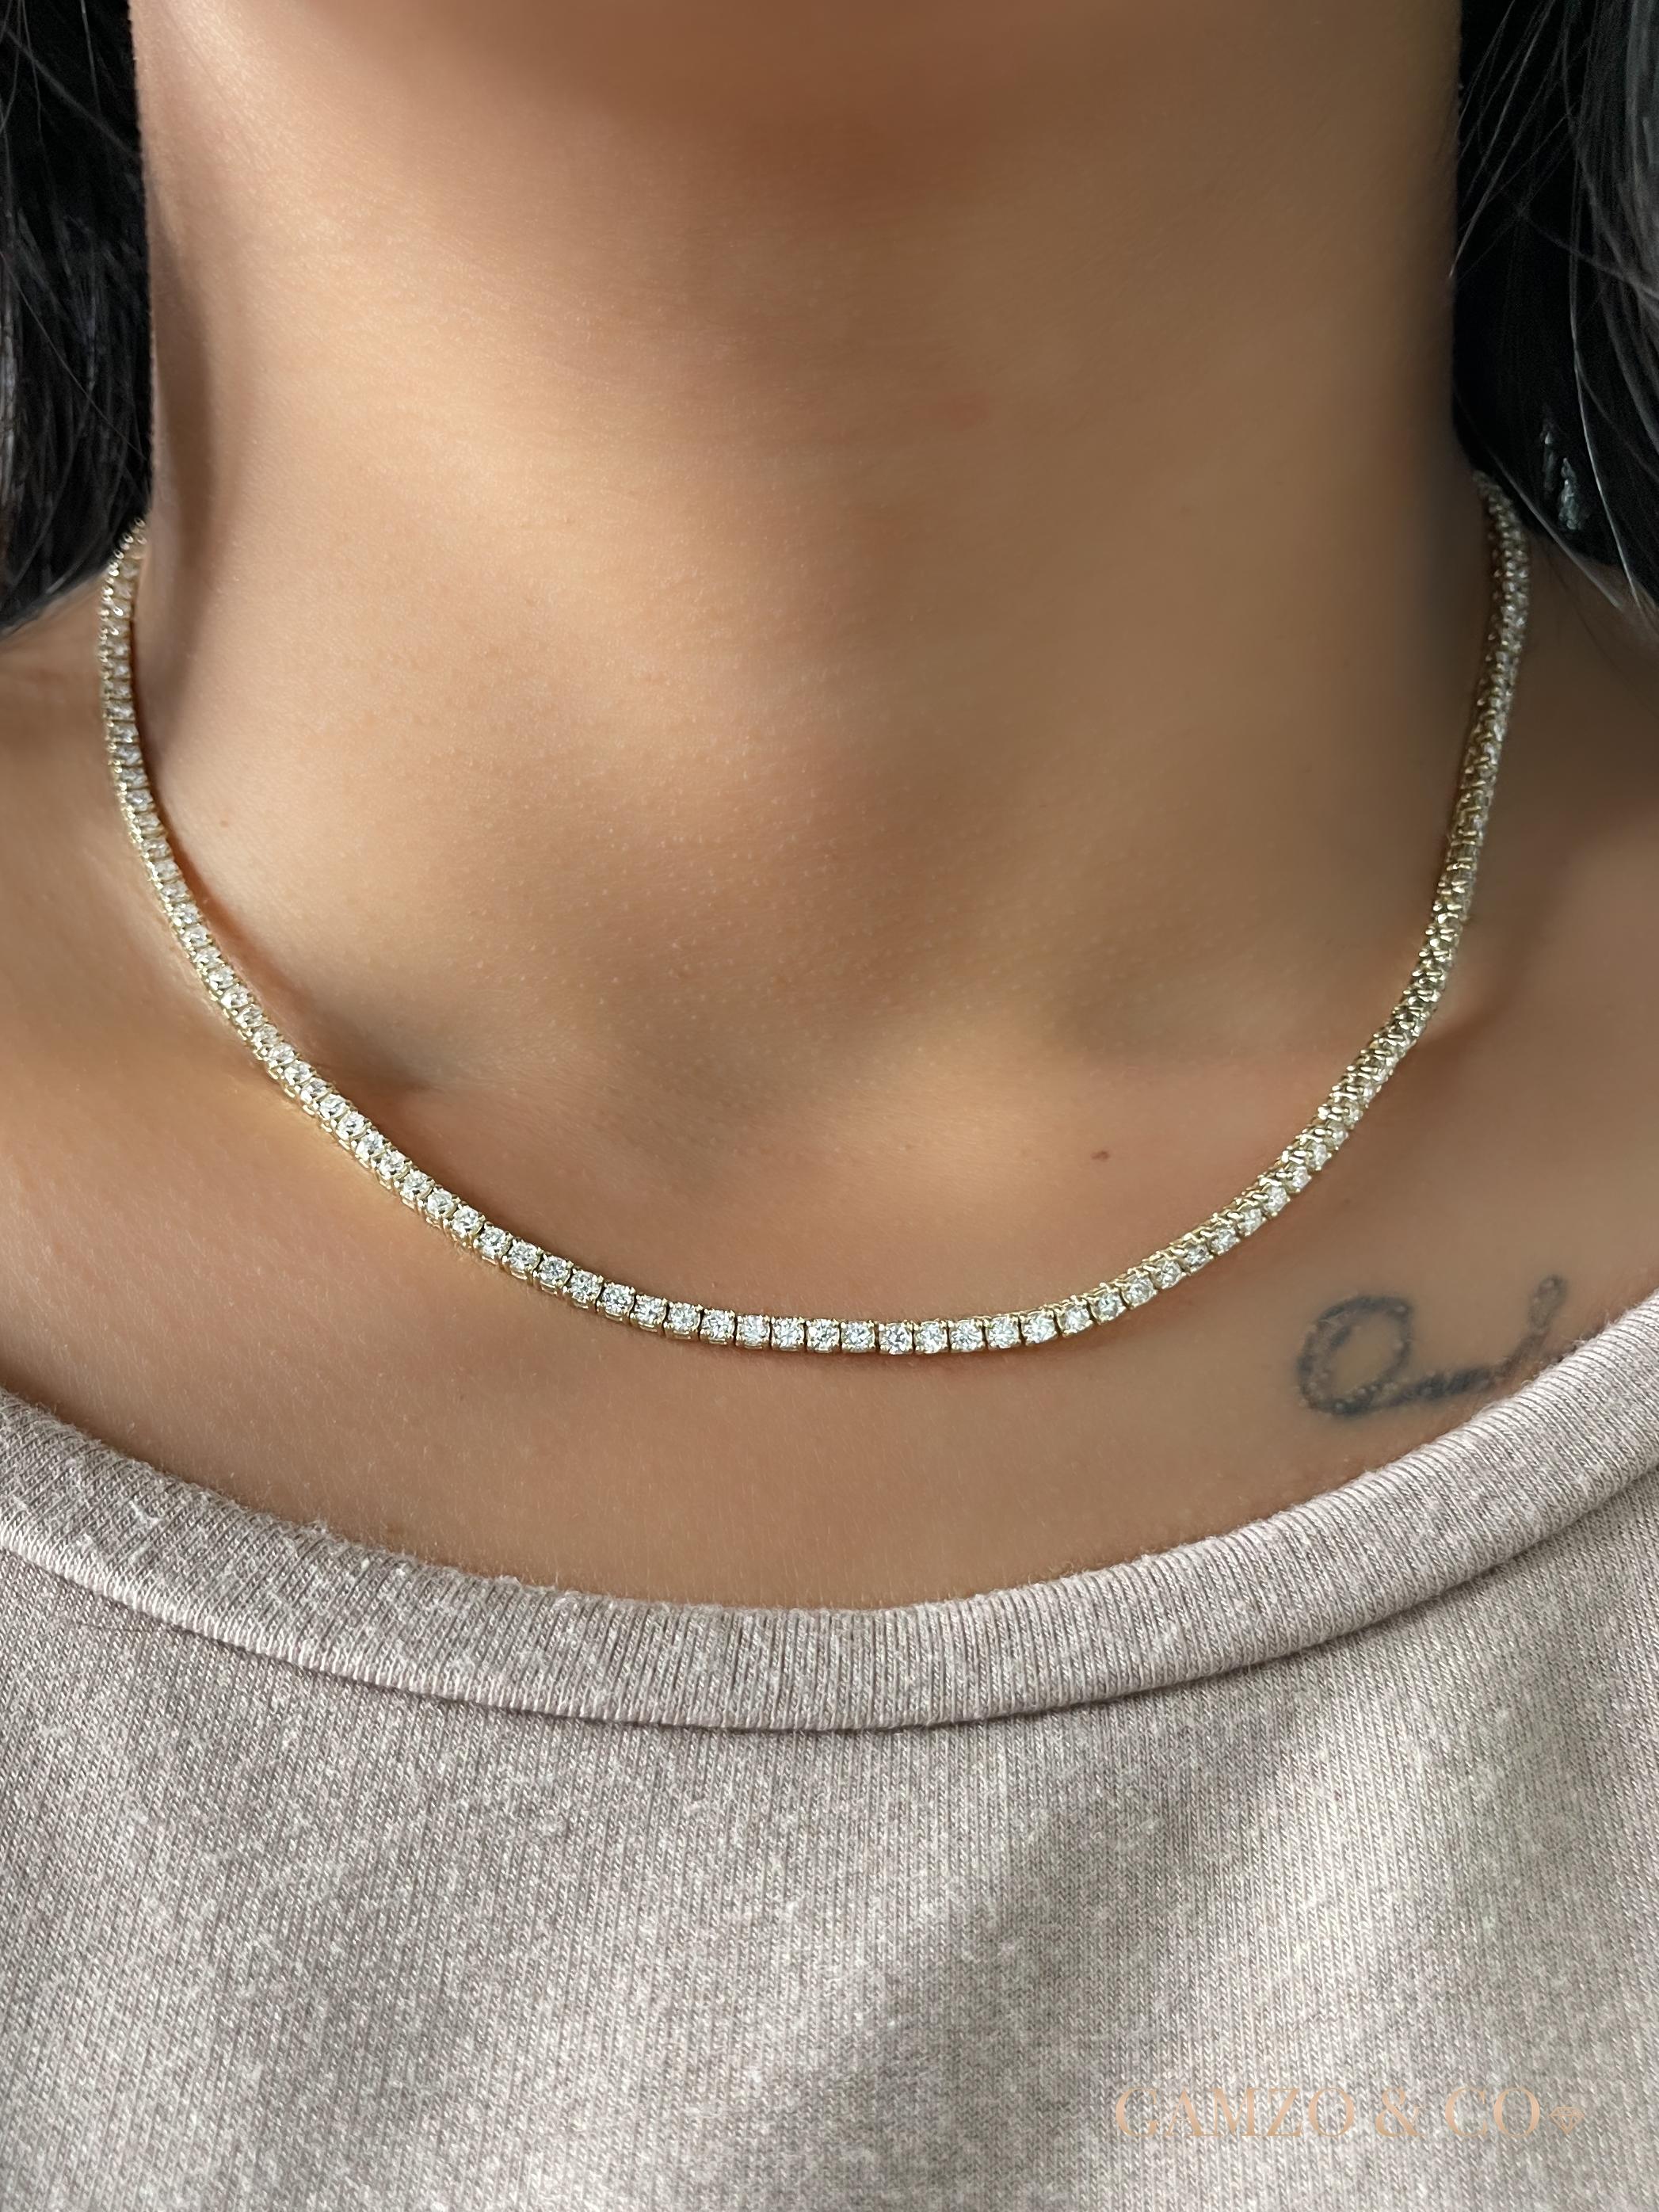 5 Carats of round diamond set on a shared prong setting in 14k white gold to create a timeless necklace. 

Metal: 14k Gold
Diamond Cut: Round
Total Approx. Diamond Carats: 5ct
Diamond Clarity: VS
Diamond Color: F-G
Size: 20
Color: White